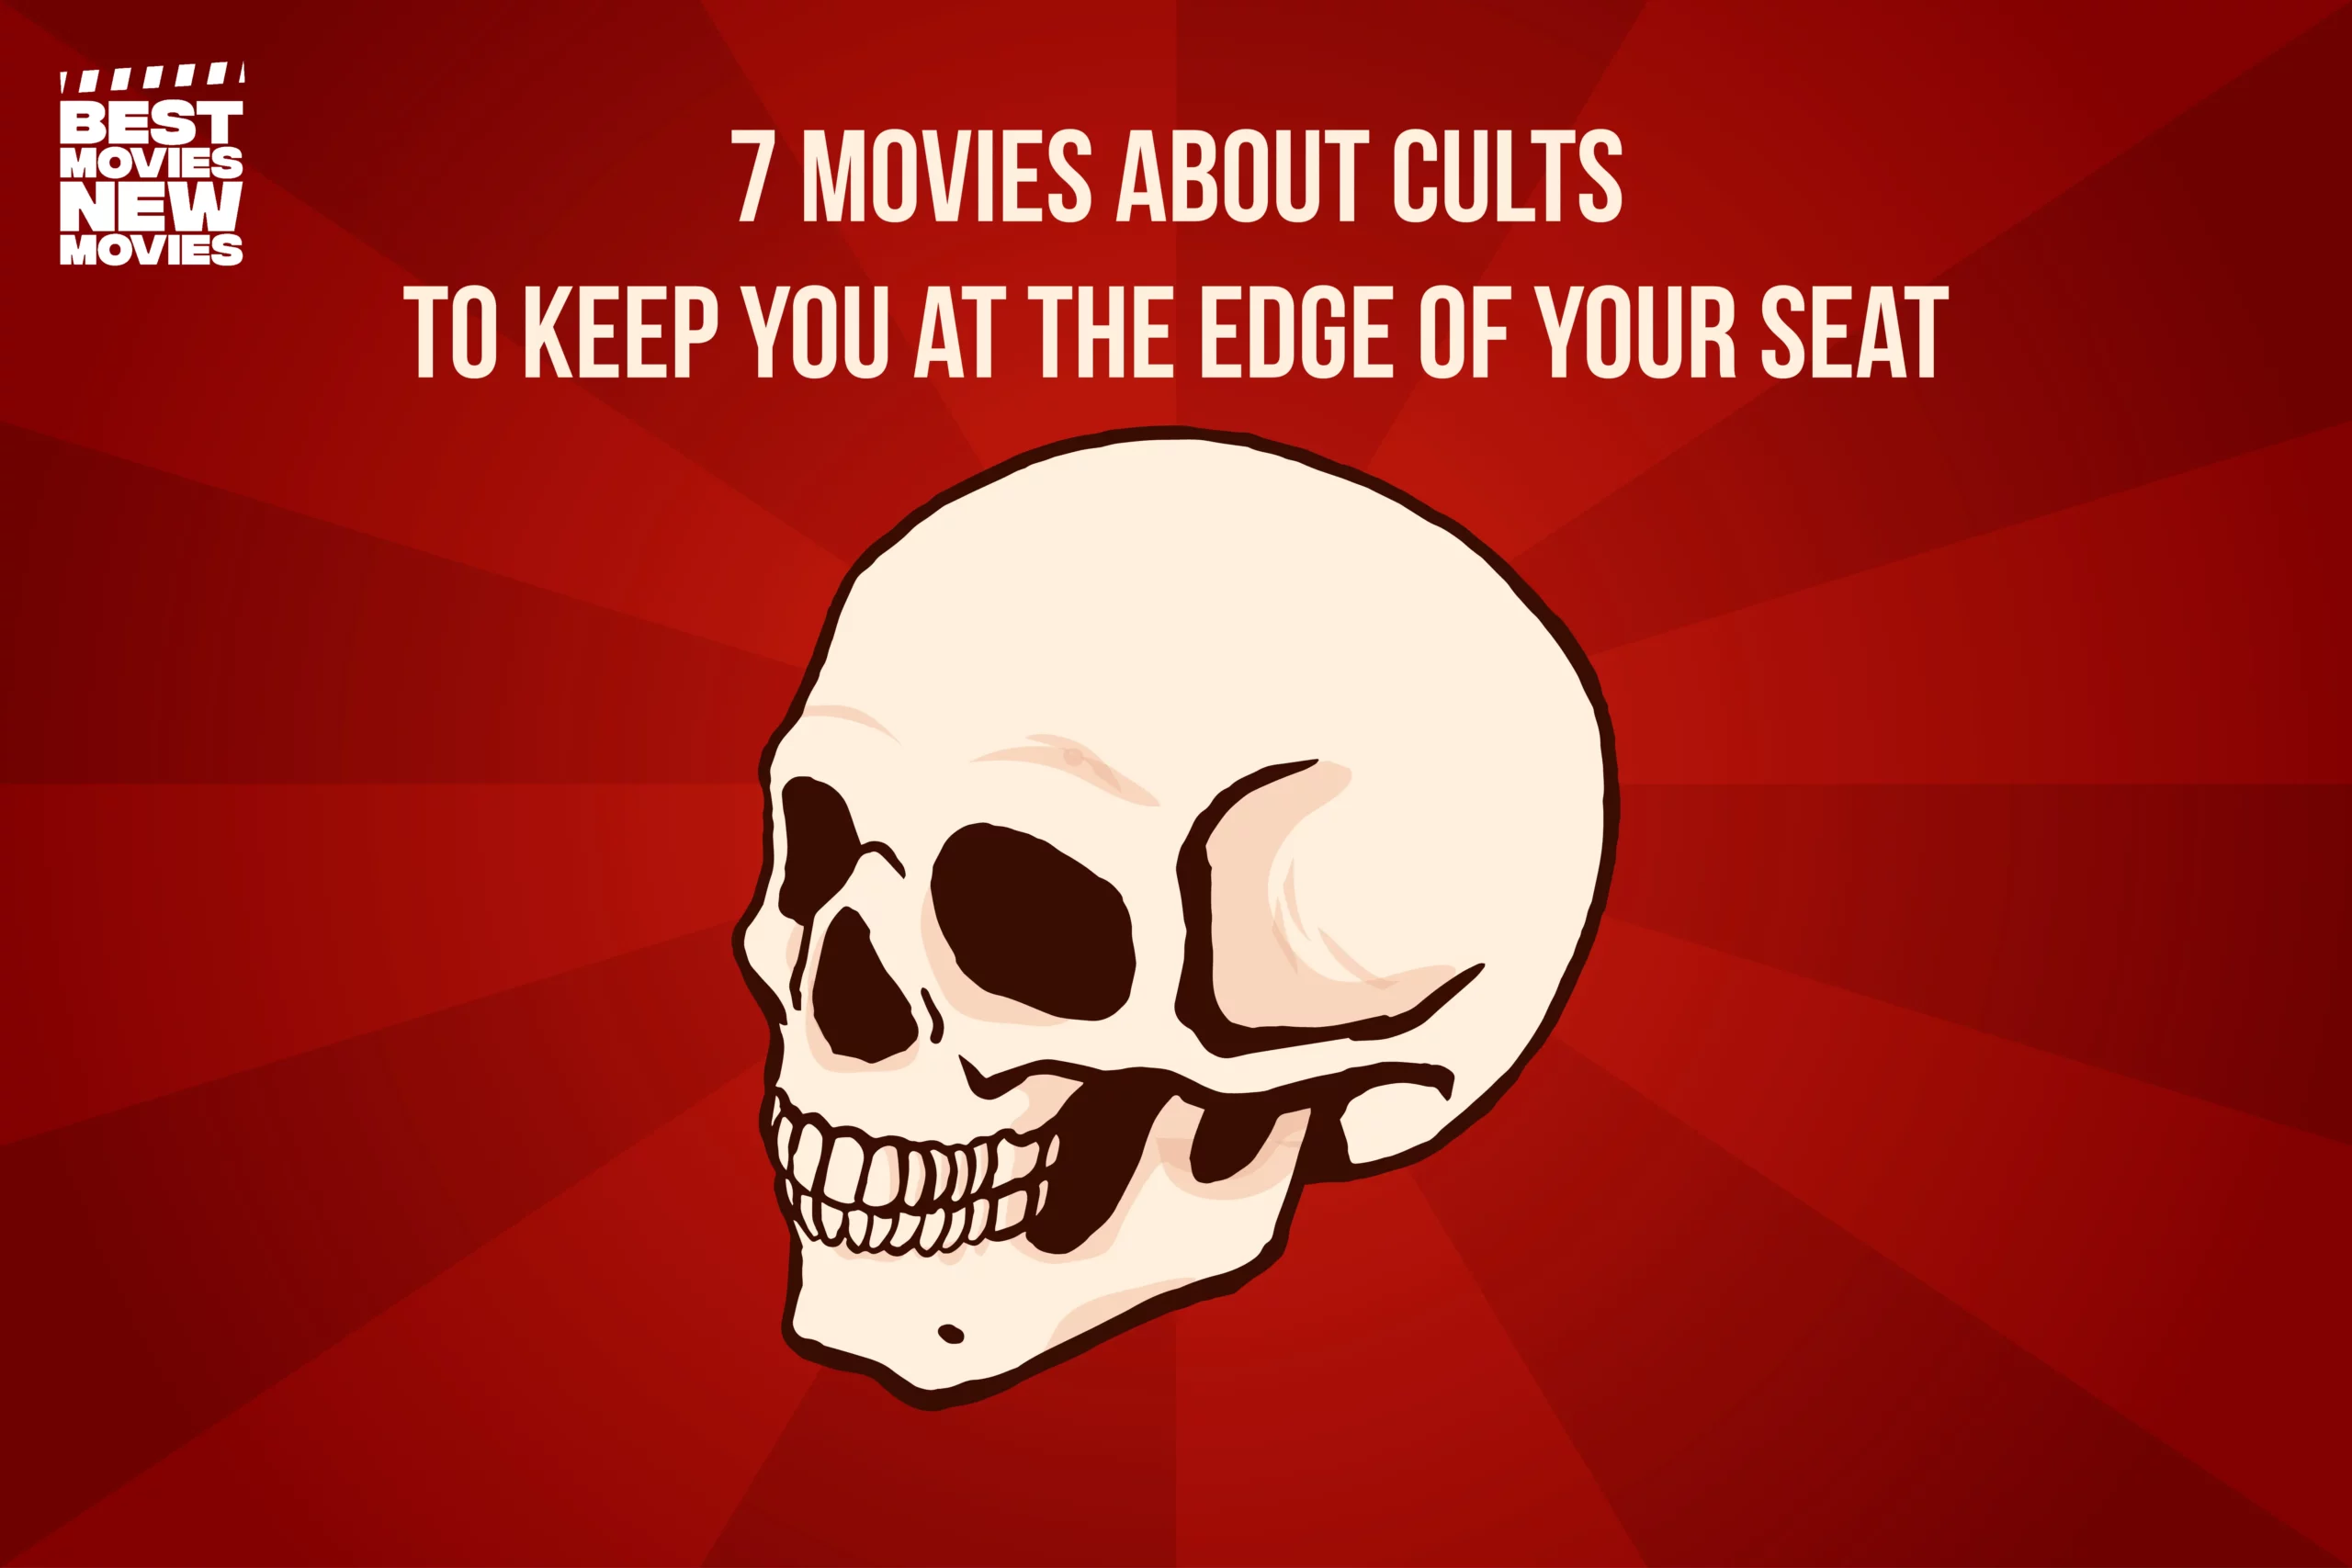 Movies About Cults